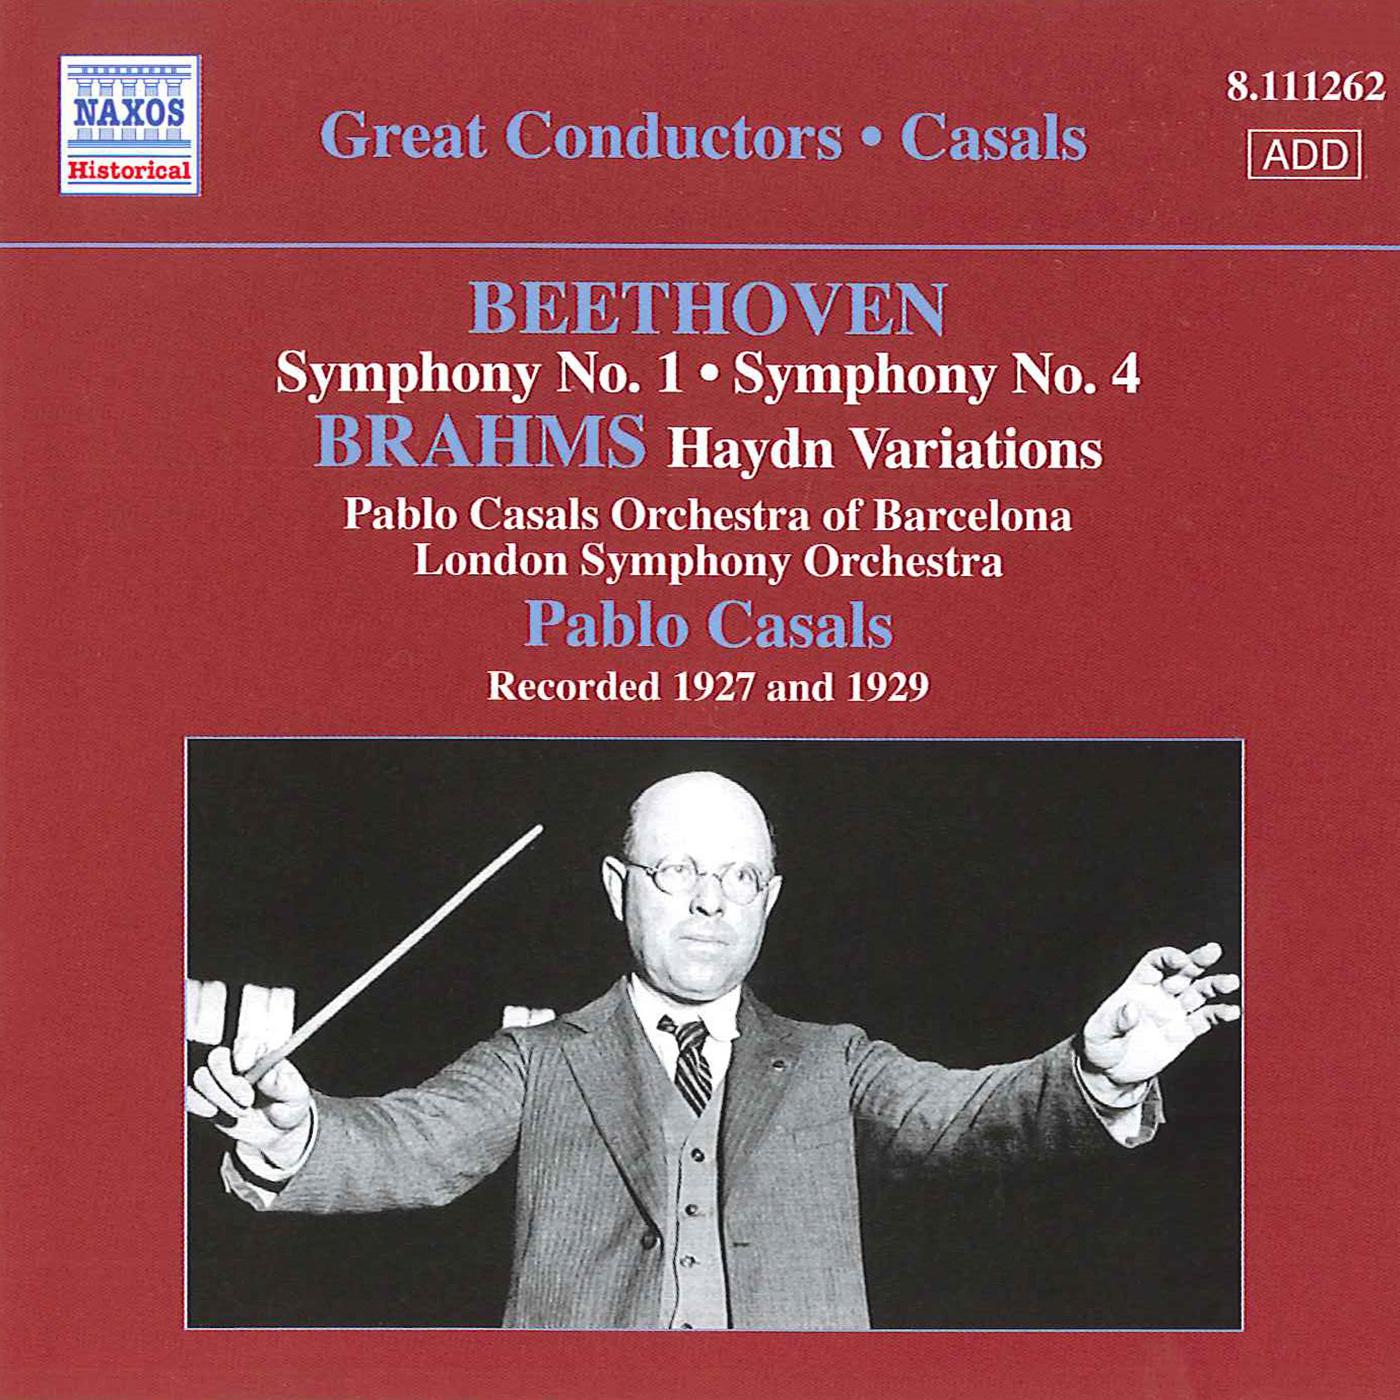 BEETHOVEN: Symphonies Nos. 1 and 4 / BRAHMS: Variations on a Theme by Haydn (Casals) (1927, 1929)